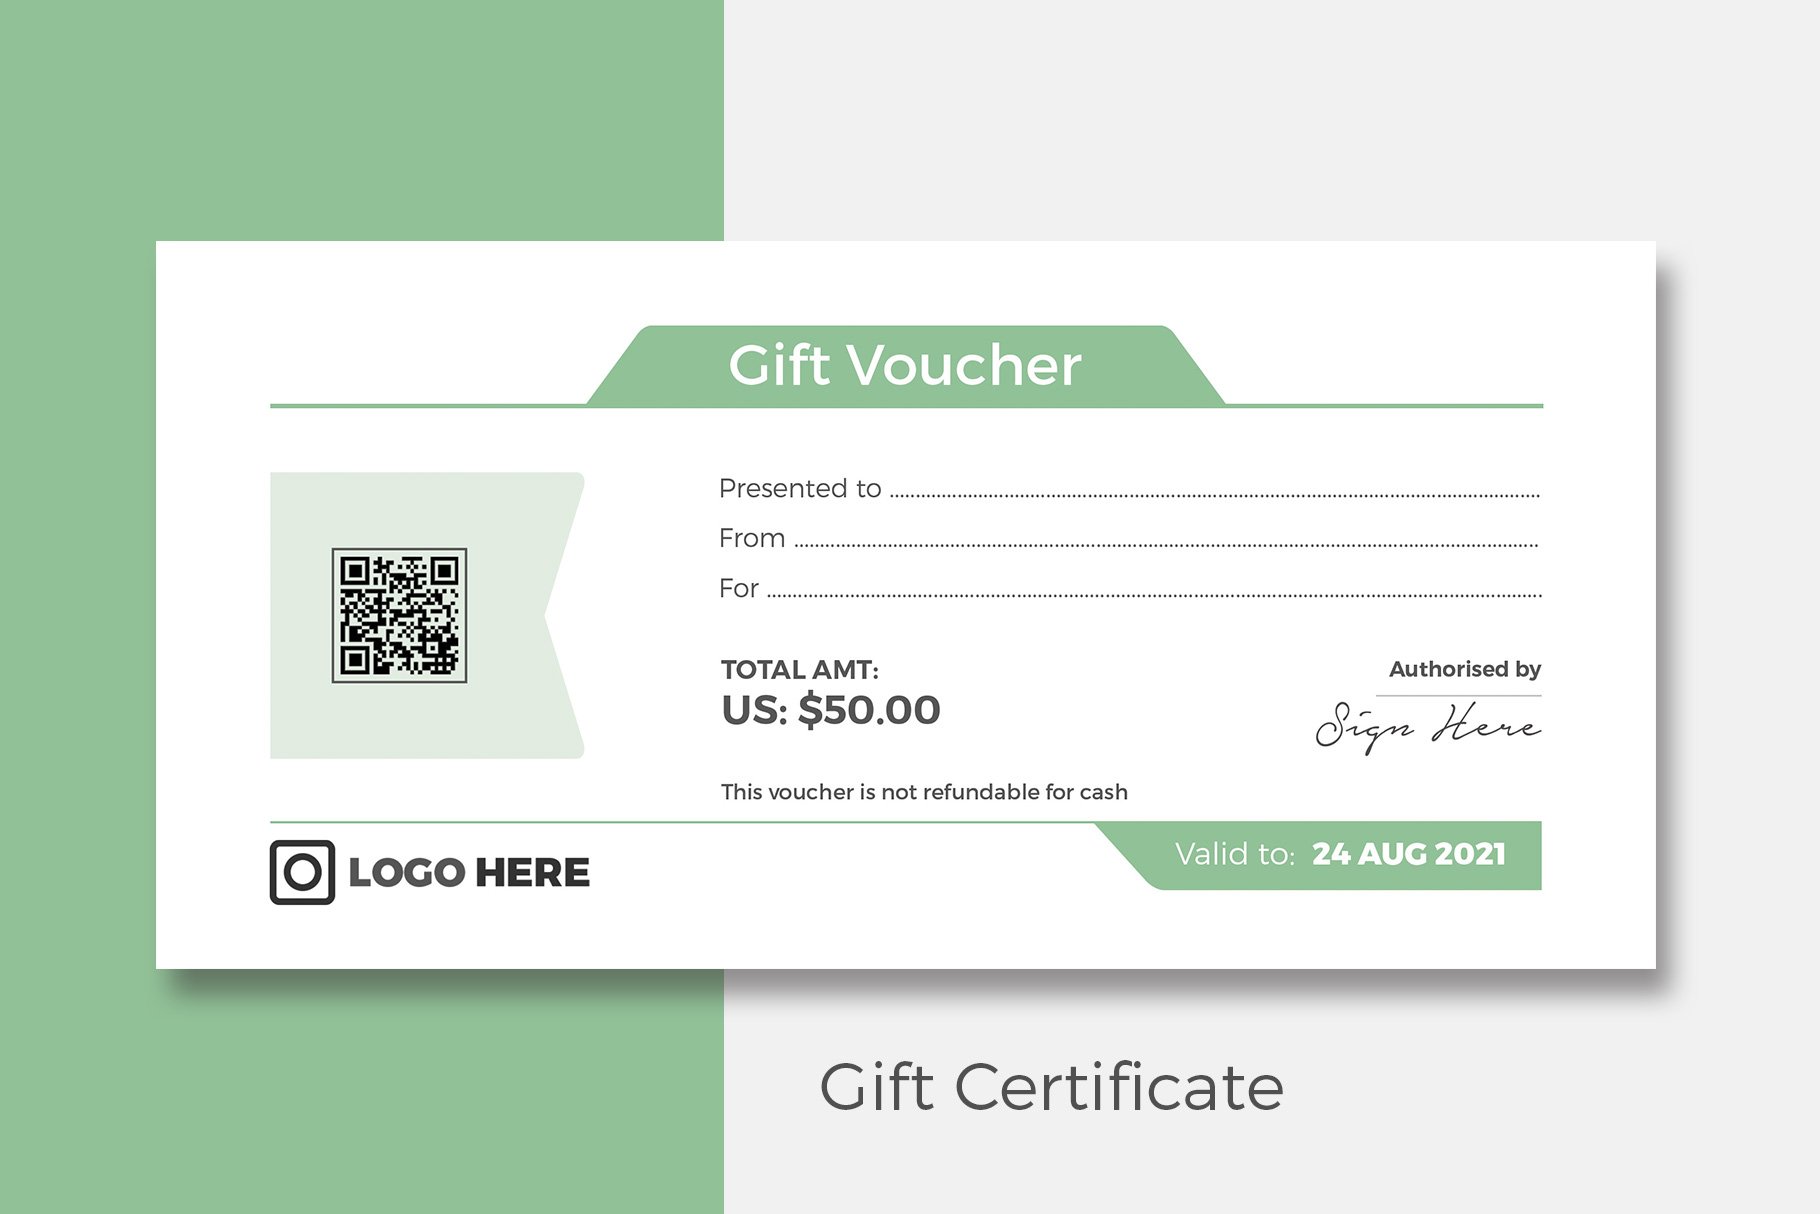 Gift Certificate preview image.